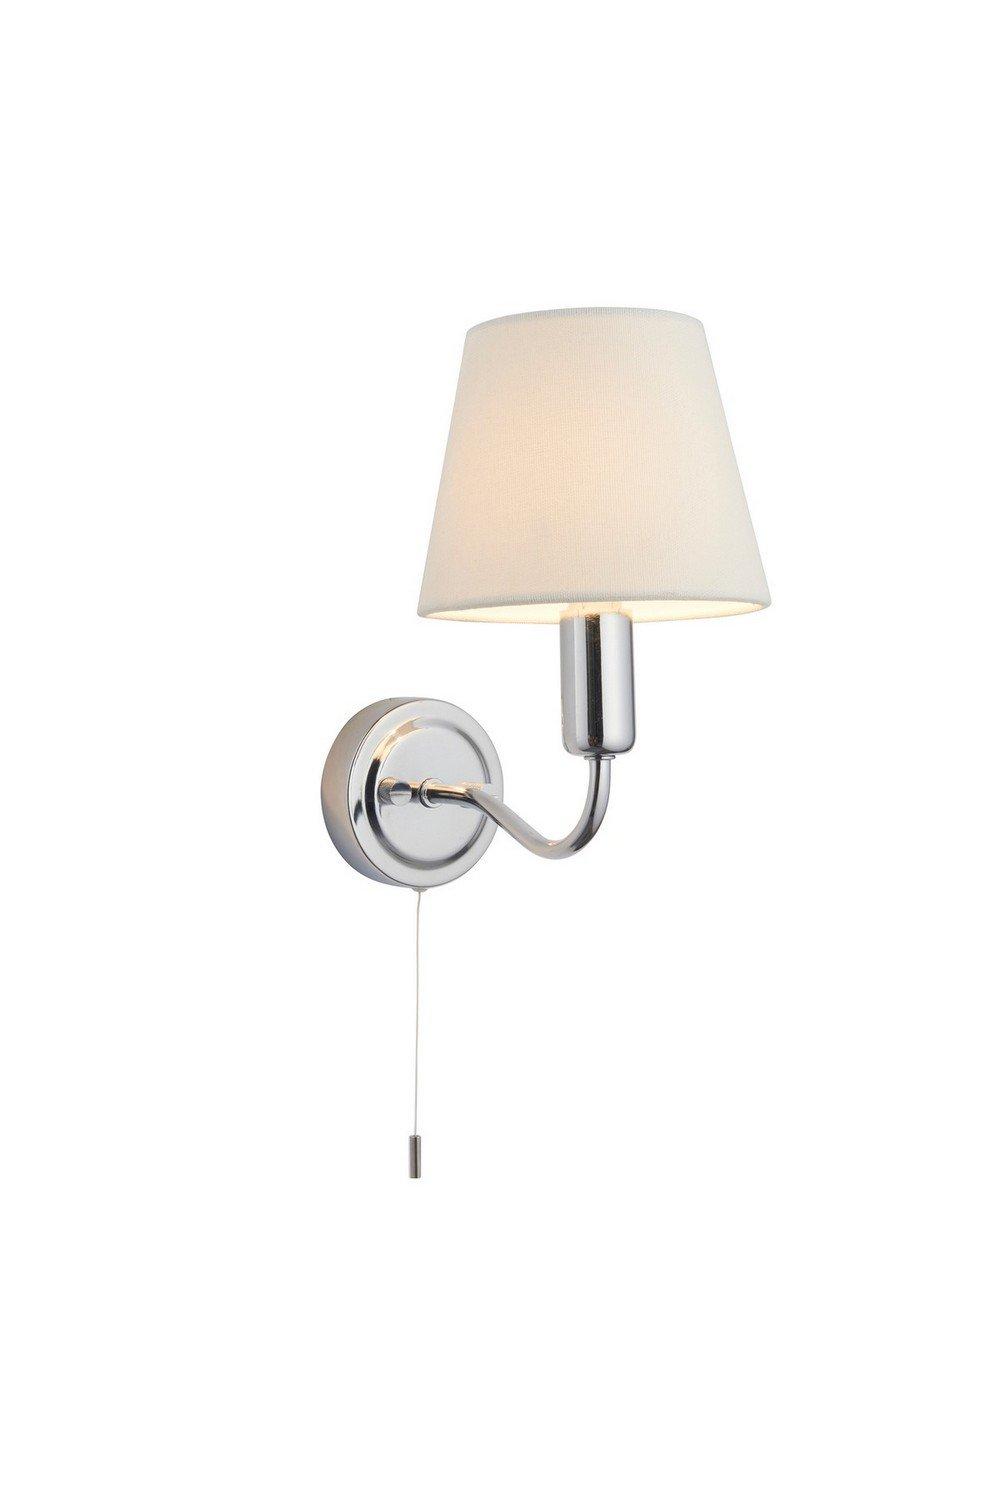 Conway Classic Wall Lamp Chrome with Ivory Tapered Shade & Pull Cord Switch IP44